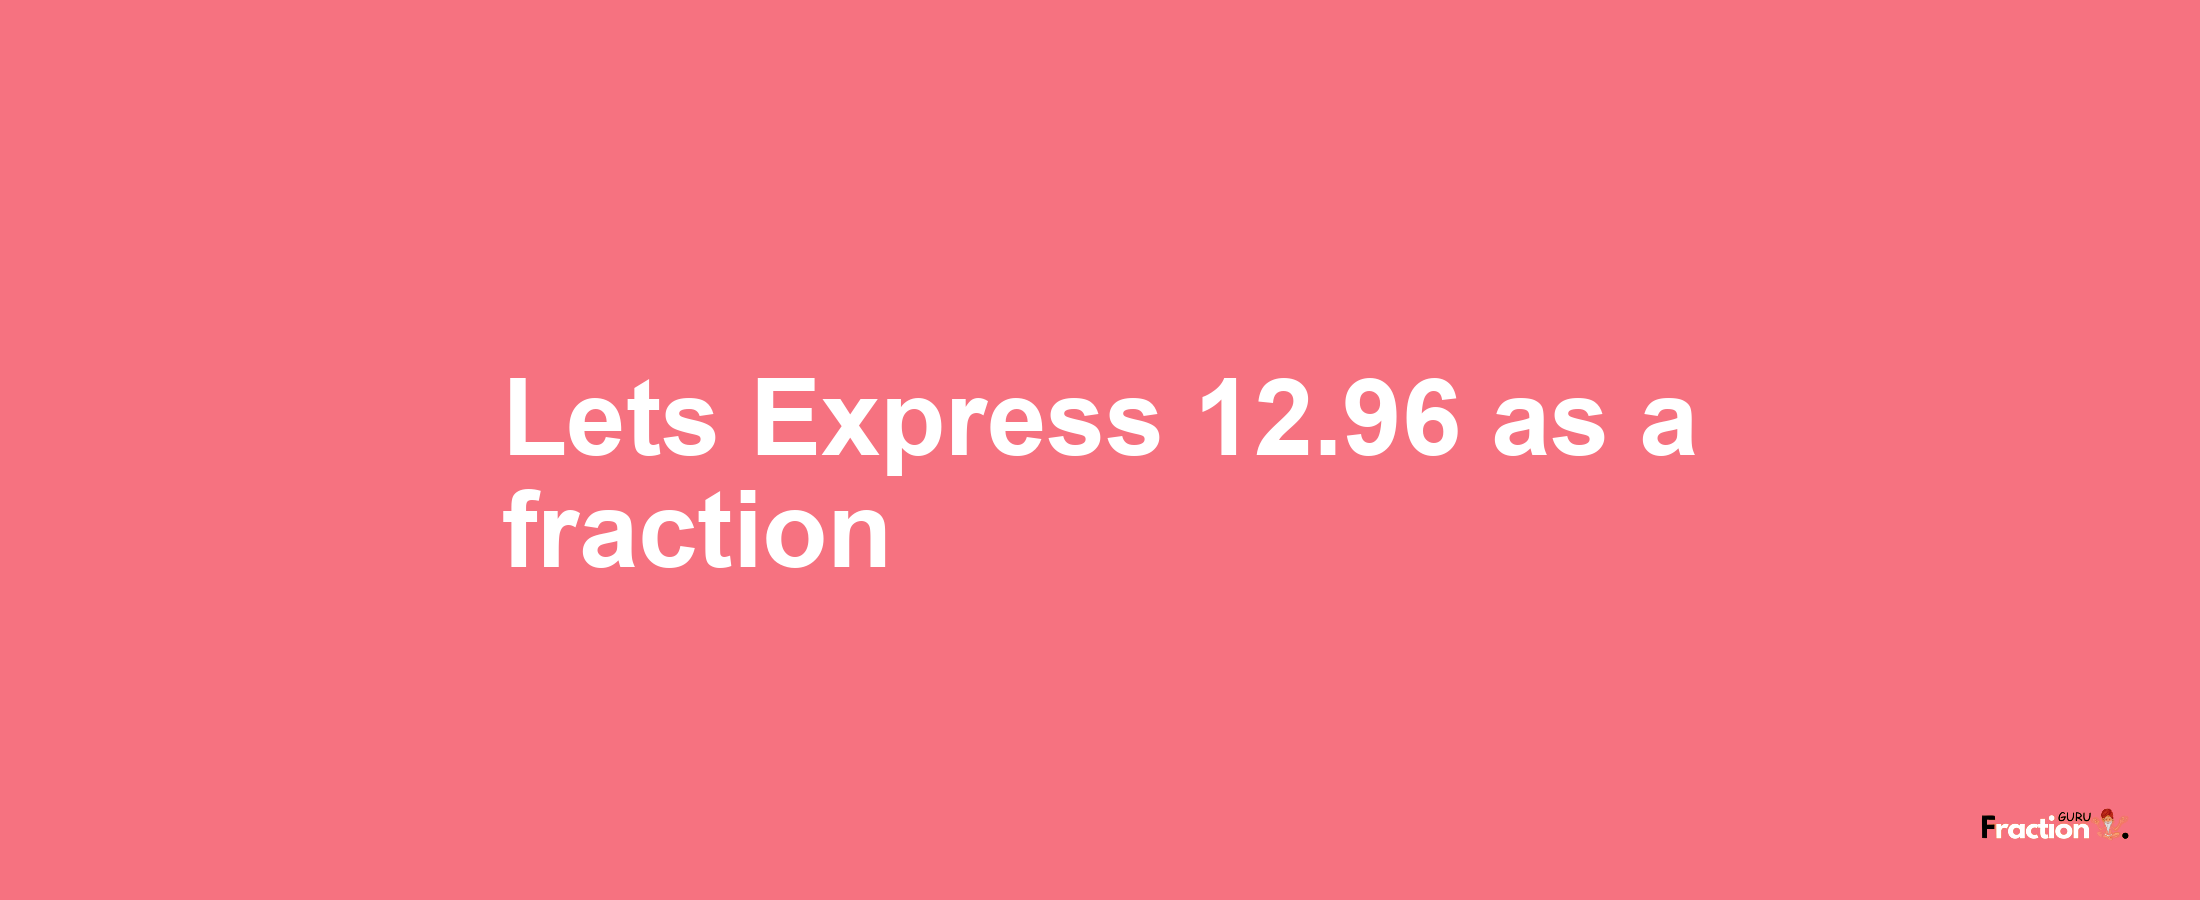 Lets Express 12.96 as afraction